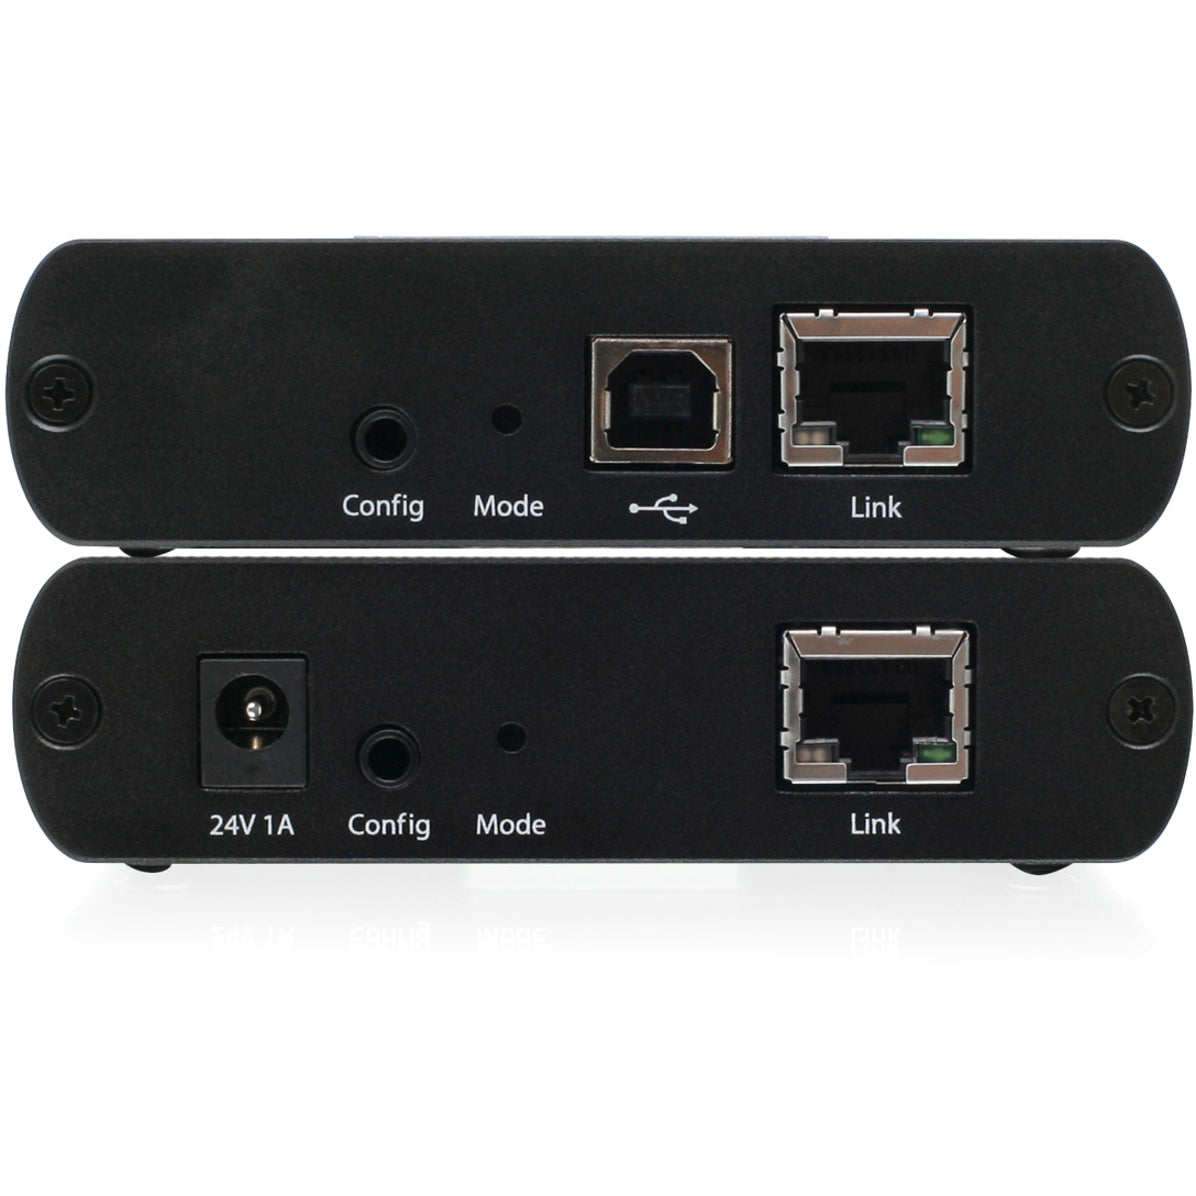 ATEN UEH4002A 4-port USB 2.0 Cat 5 Extender (up to 100m), Extend USB Connections up to 328ft